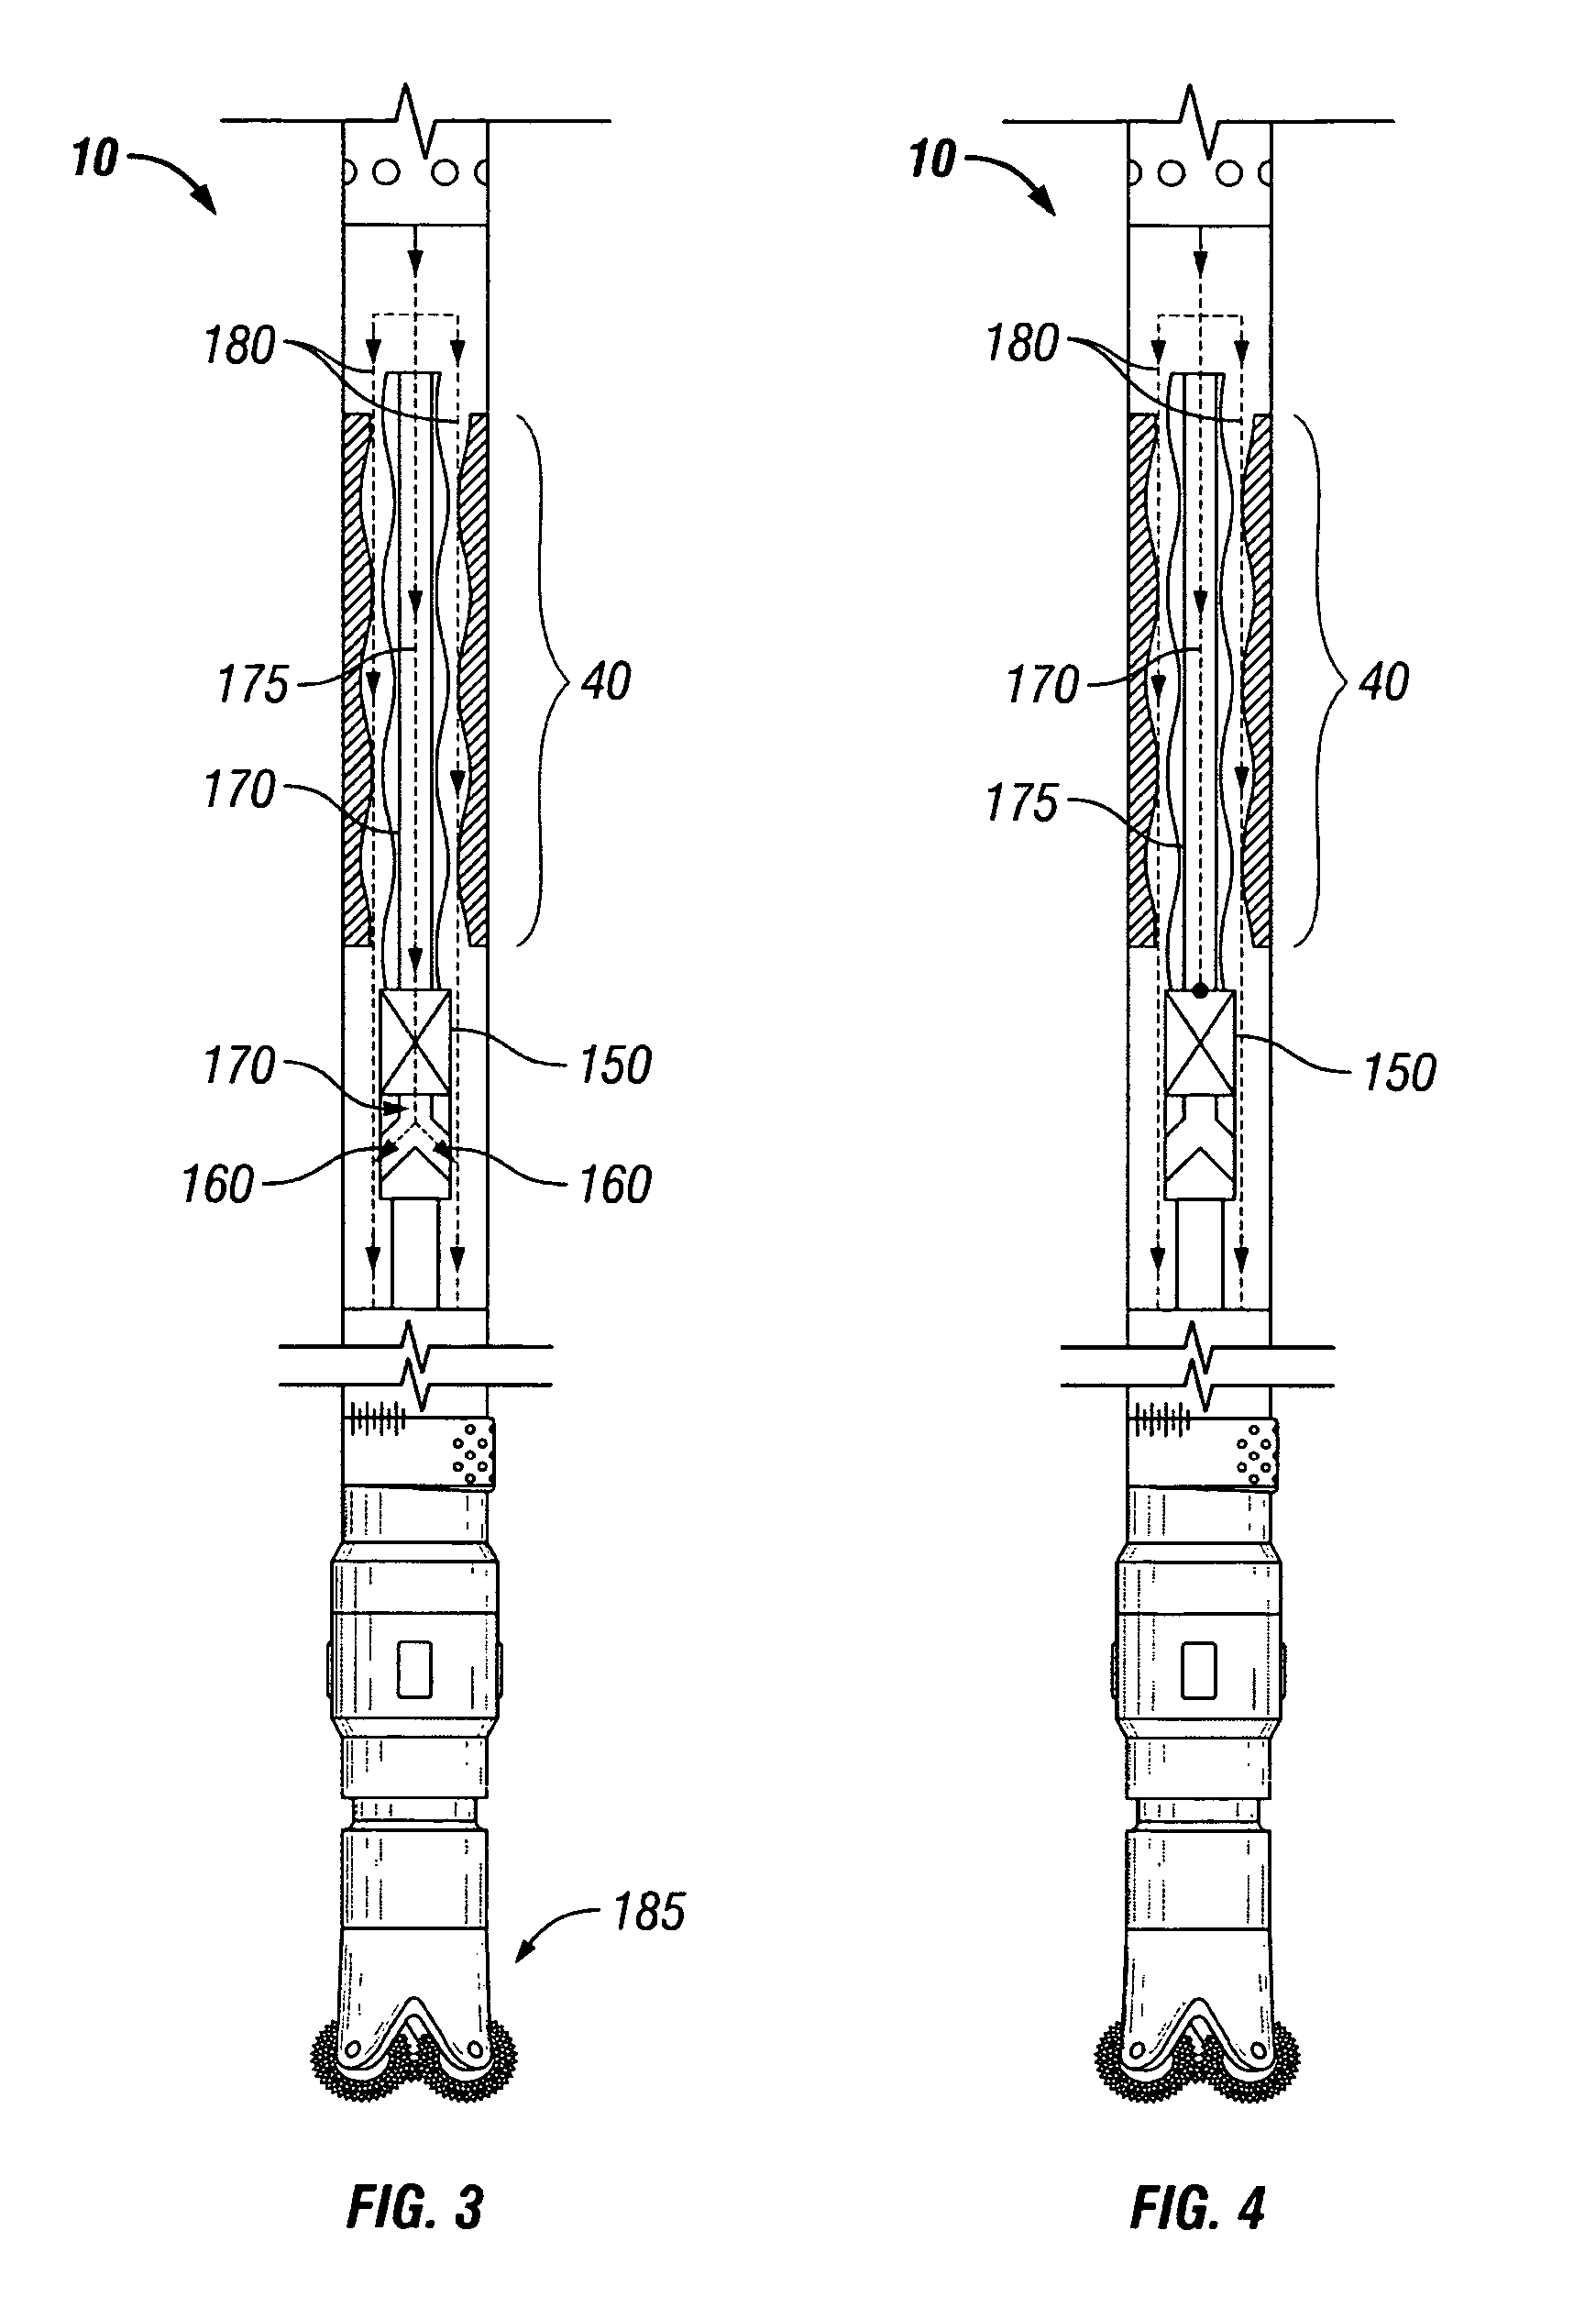 Method and apparatus for shifting speeds in a fluid-actuated motor